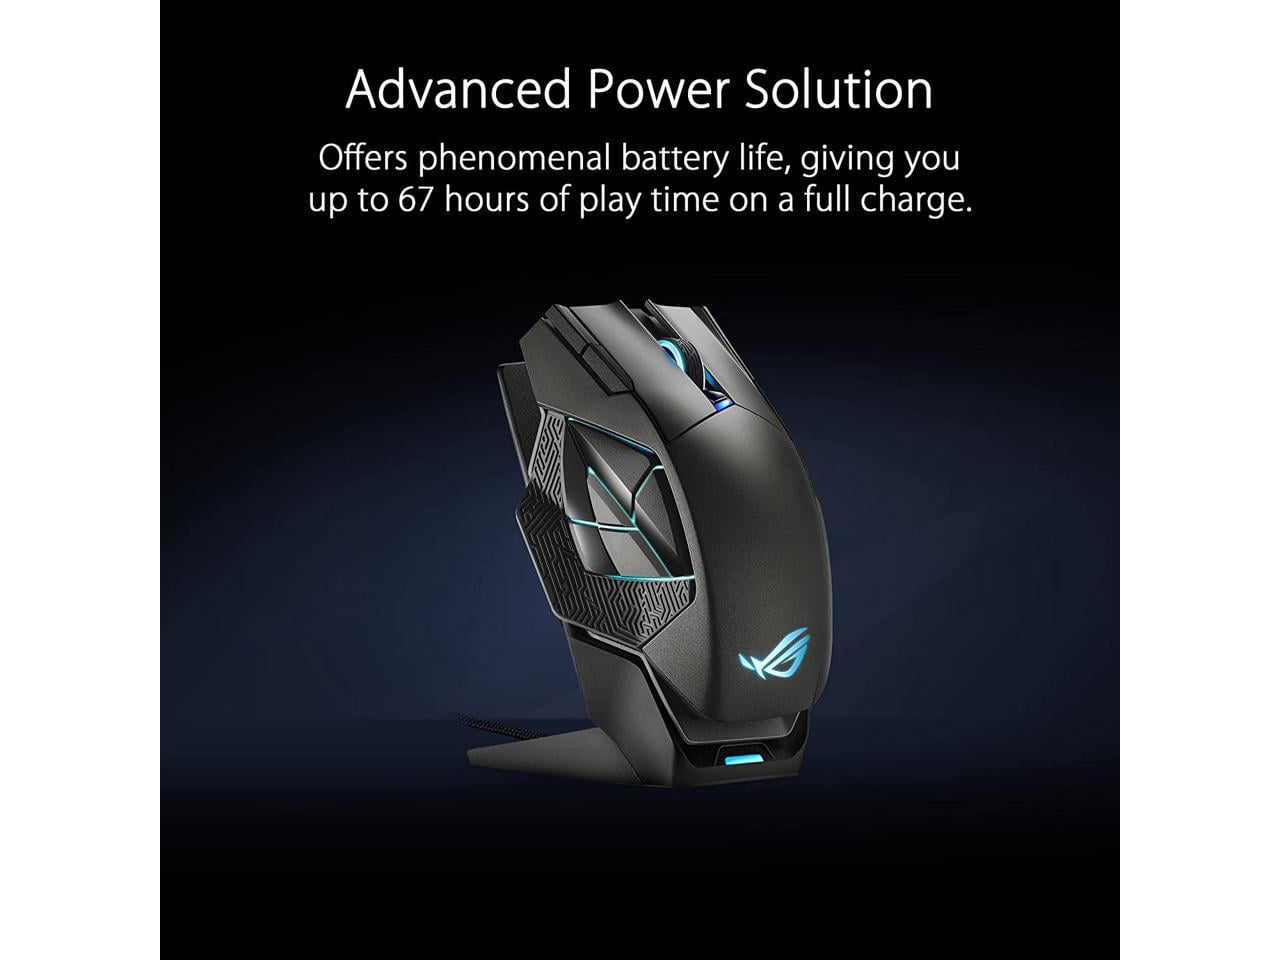 Hot Sockets, Charging RGB (Magnetic Spatha Programmable Aura ROG lighting) ASUS Wireless ROG Push-fit Switch Mouse 12 Buttons, ROG Paracord X Micro Gaming Swap 19,000 Stand, DPI, Switches, and